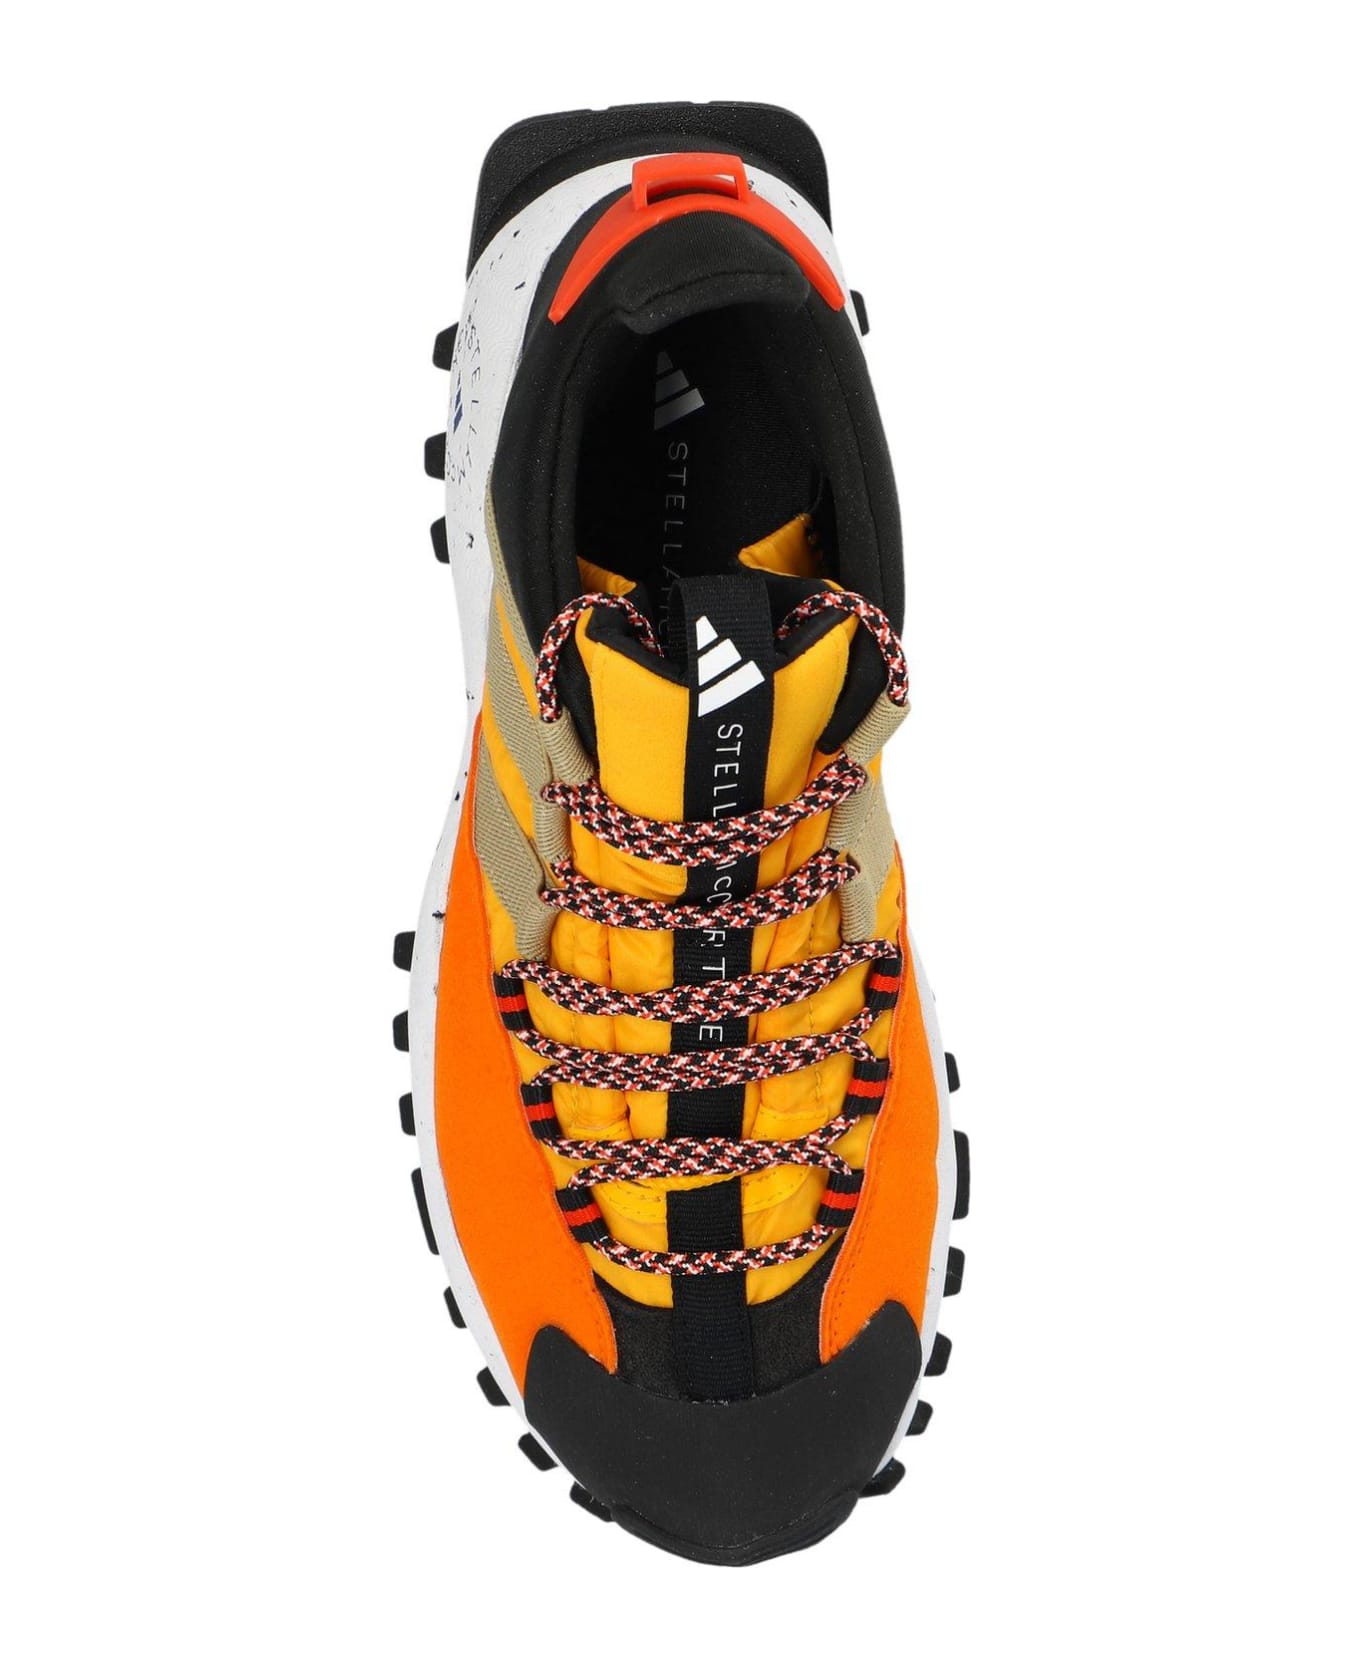 Adidas by Stella McCartney Seeulater Lace-up Sneakers - ORANGE スニーカー